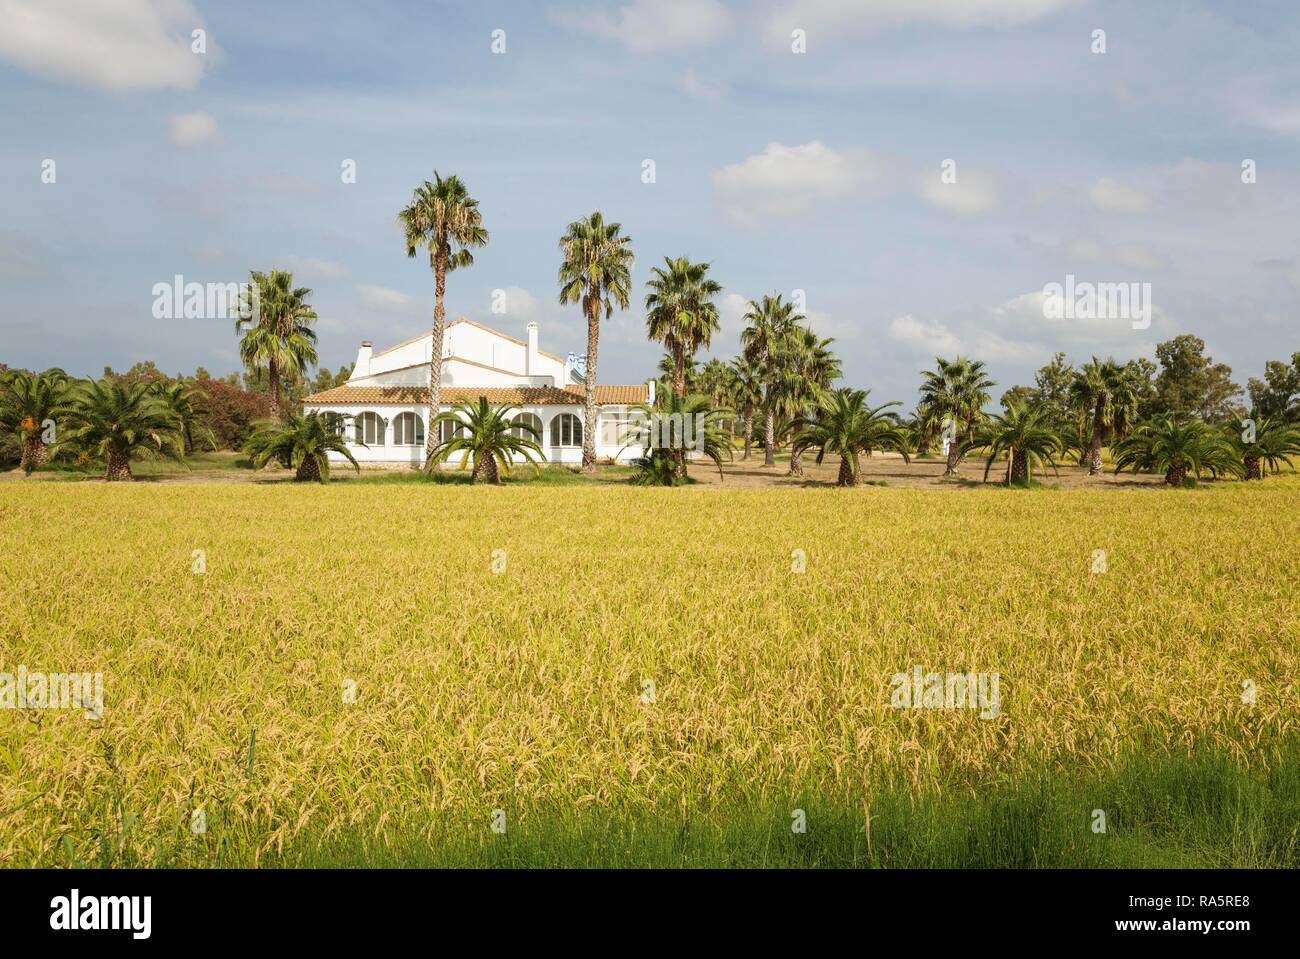 The Tramontano farm house amidst rice fields (Oryza sativa), in September at the time of the rice harvest, environs of the Ebro Stock Photo